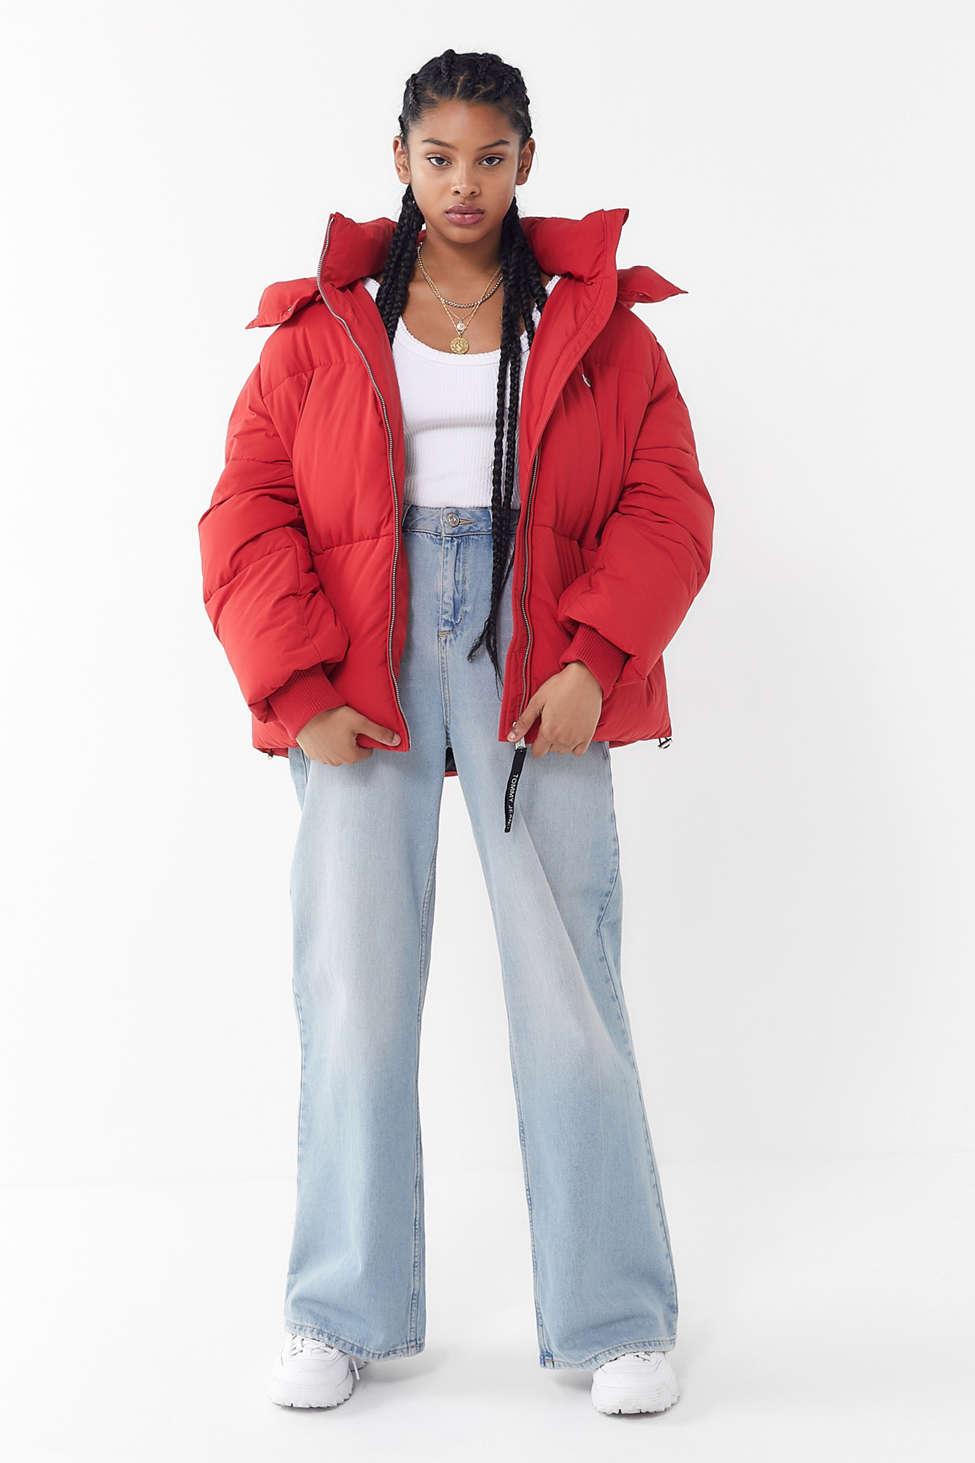 Tommy Hilfiger Denim Oversized Hooded Puffer Coat in Red - Lyst